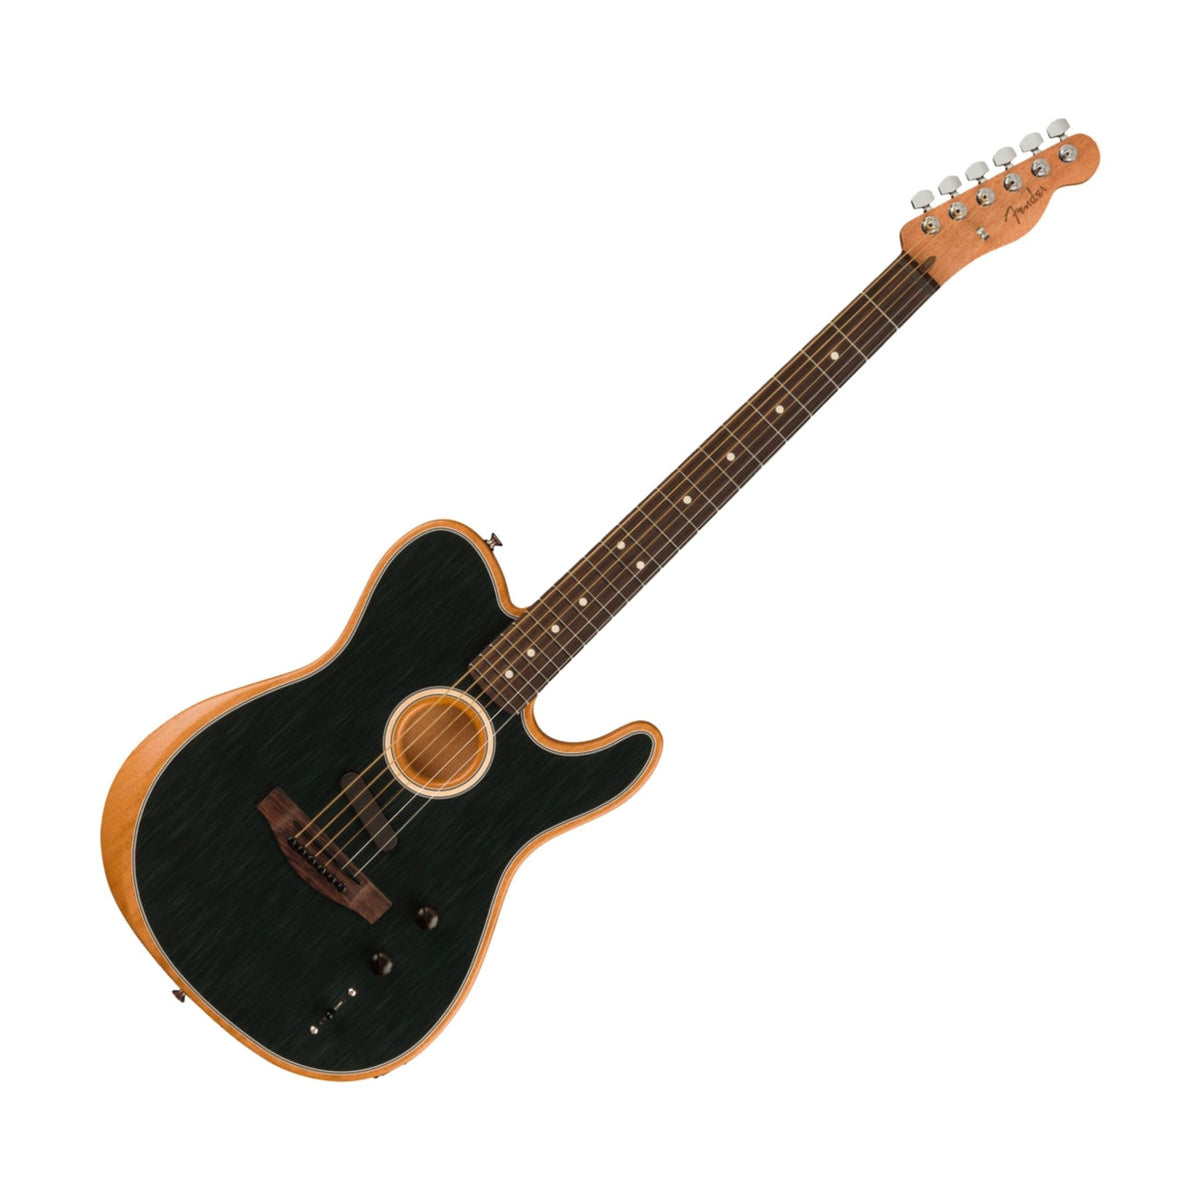 The Fender Acoustasonic Telecaster is both unique and imaginative. This acoustic-electric guitar offers its own set of six voices that showcases its unique personality.